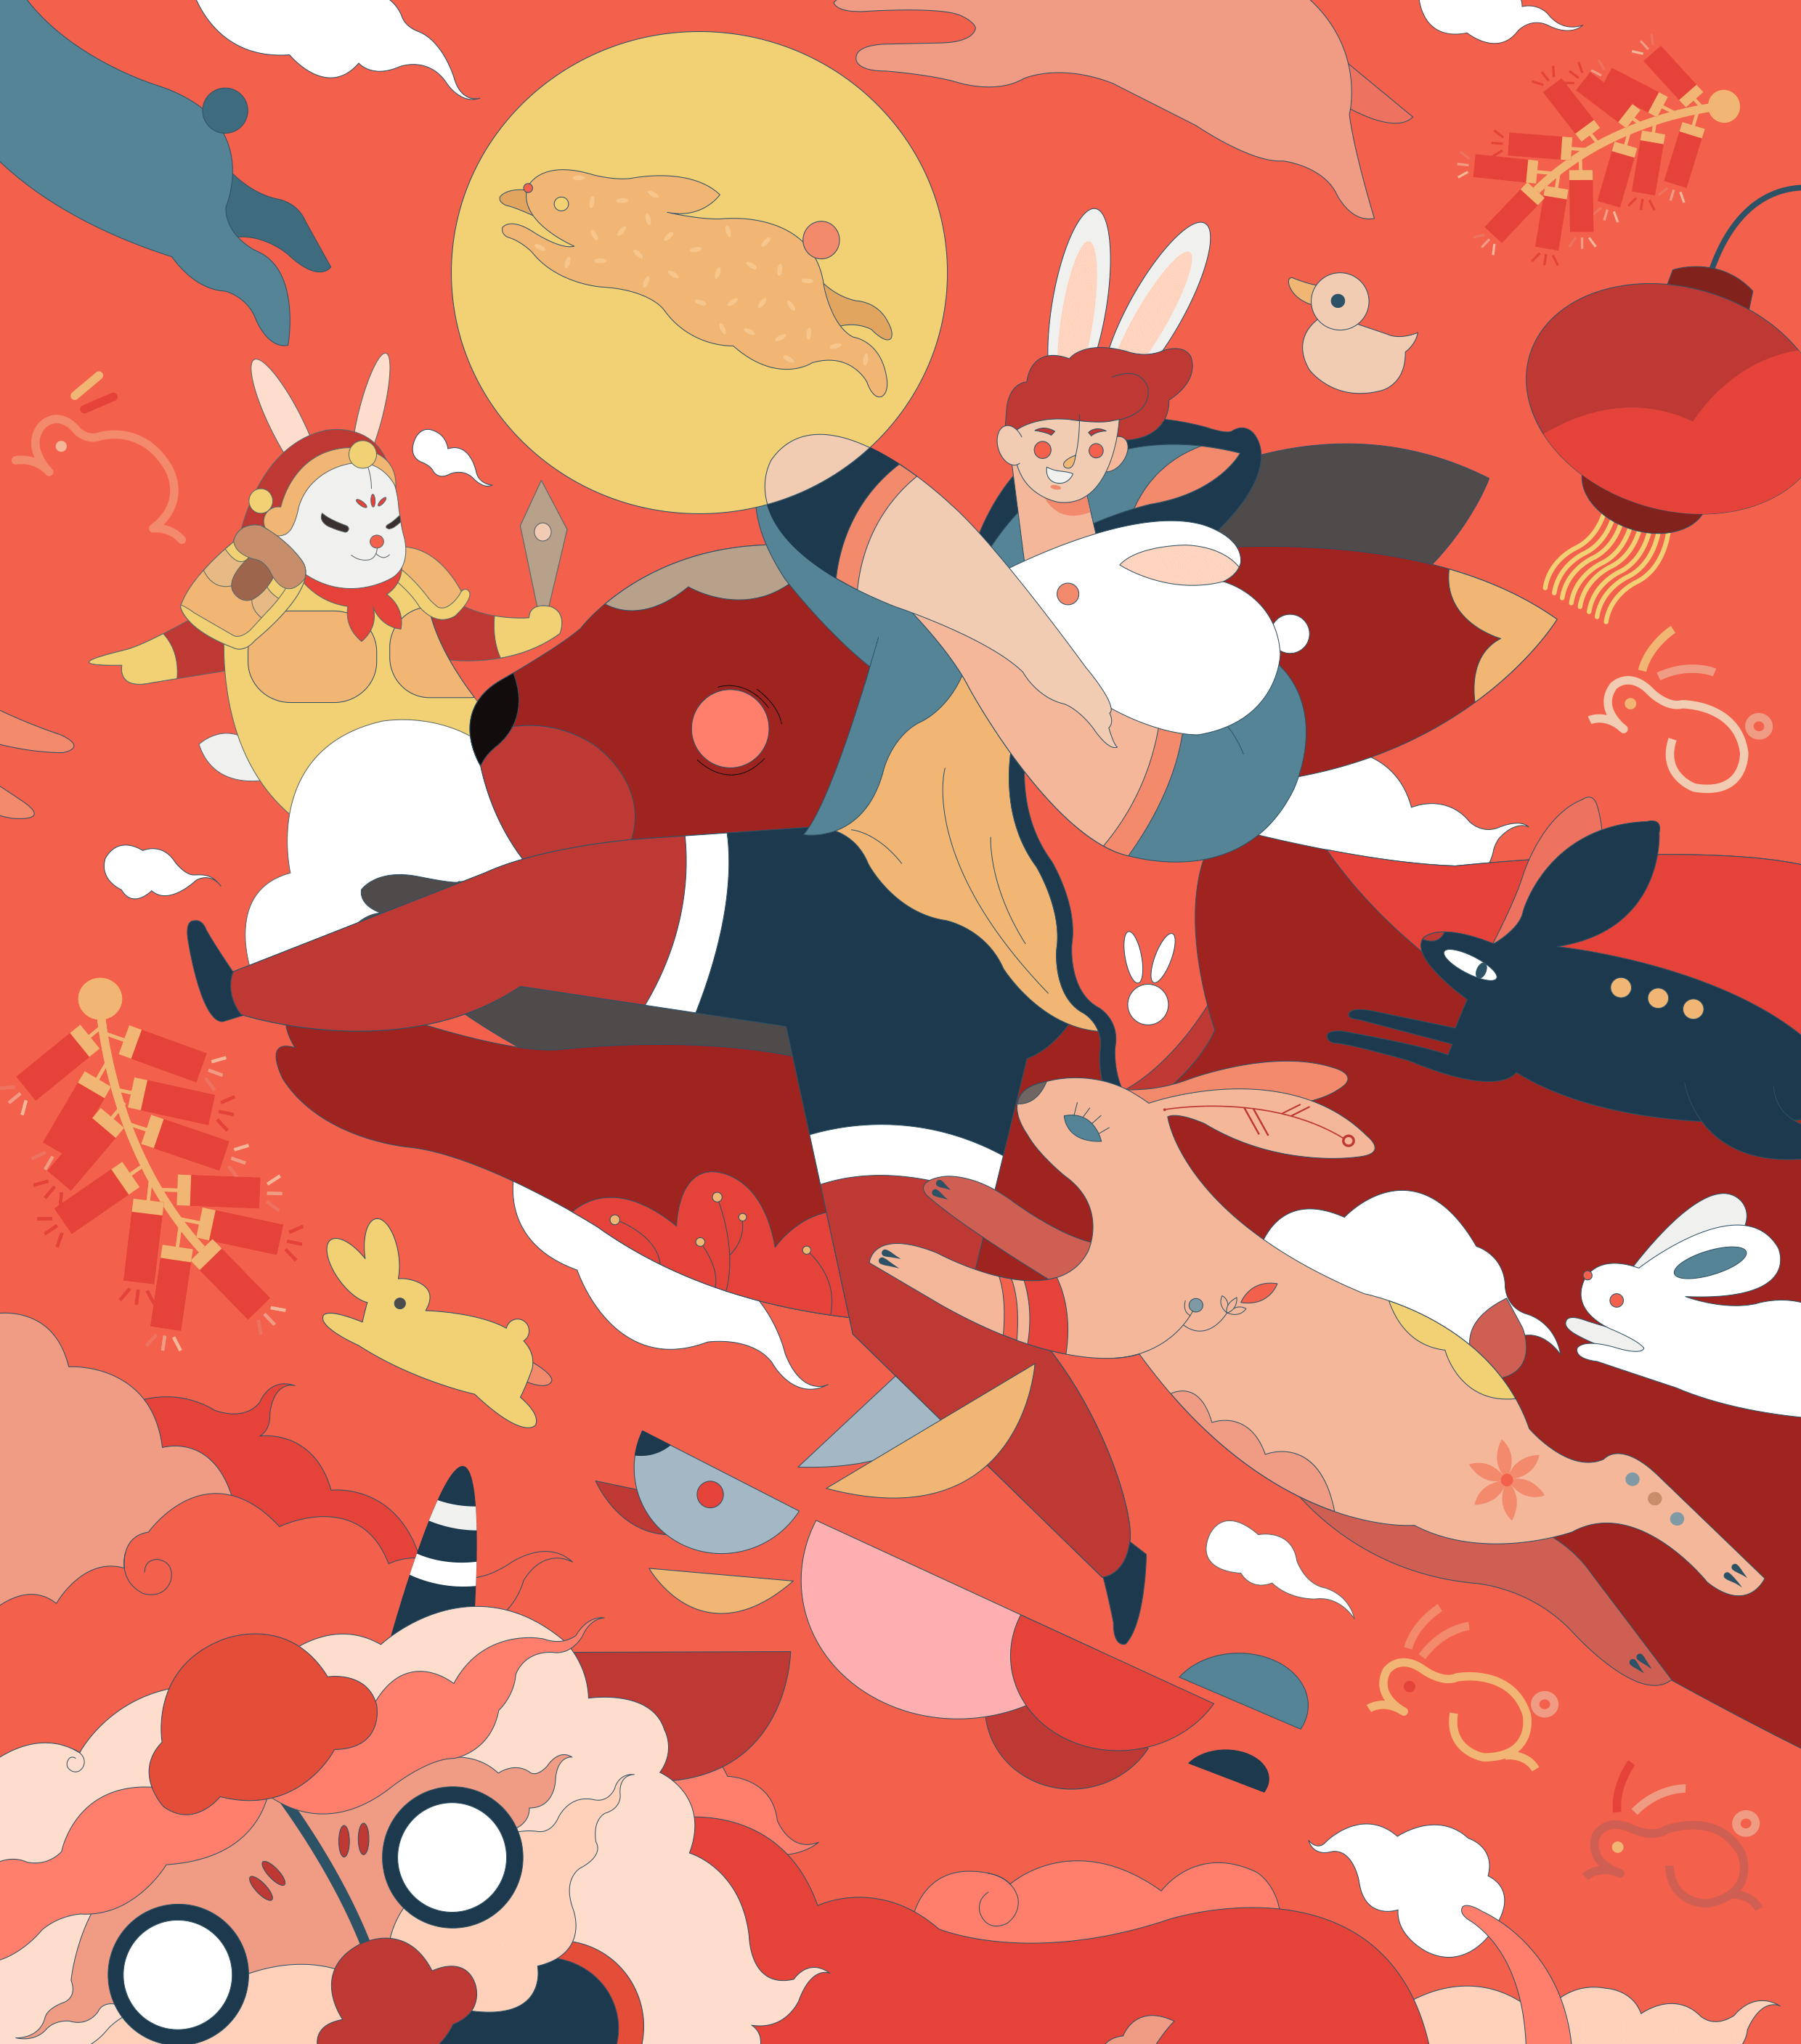  Illustration with rabbits and folklore elements